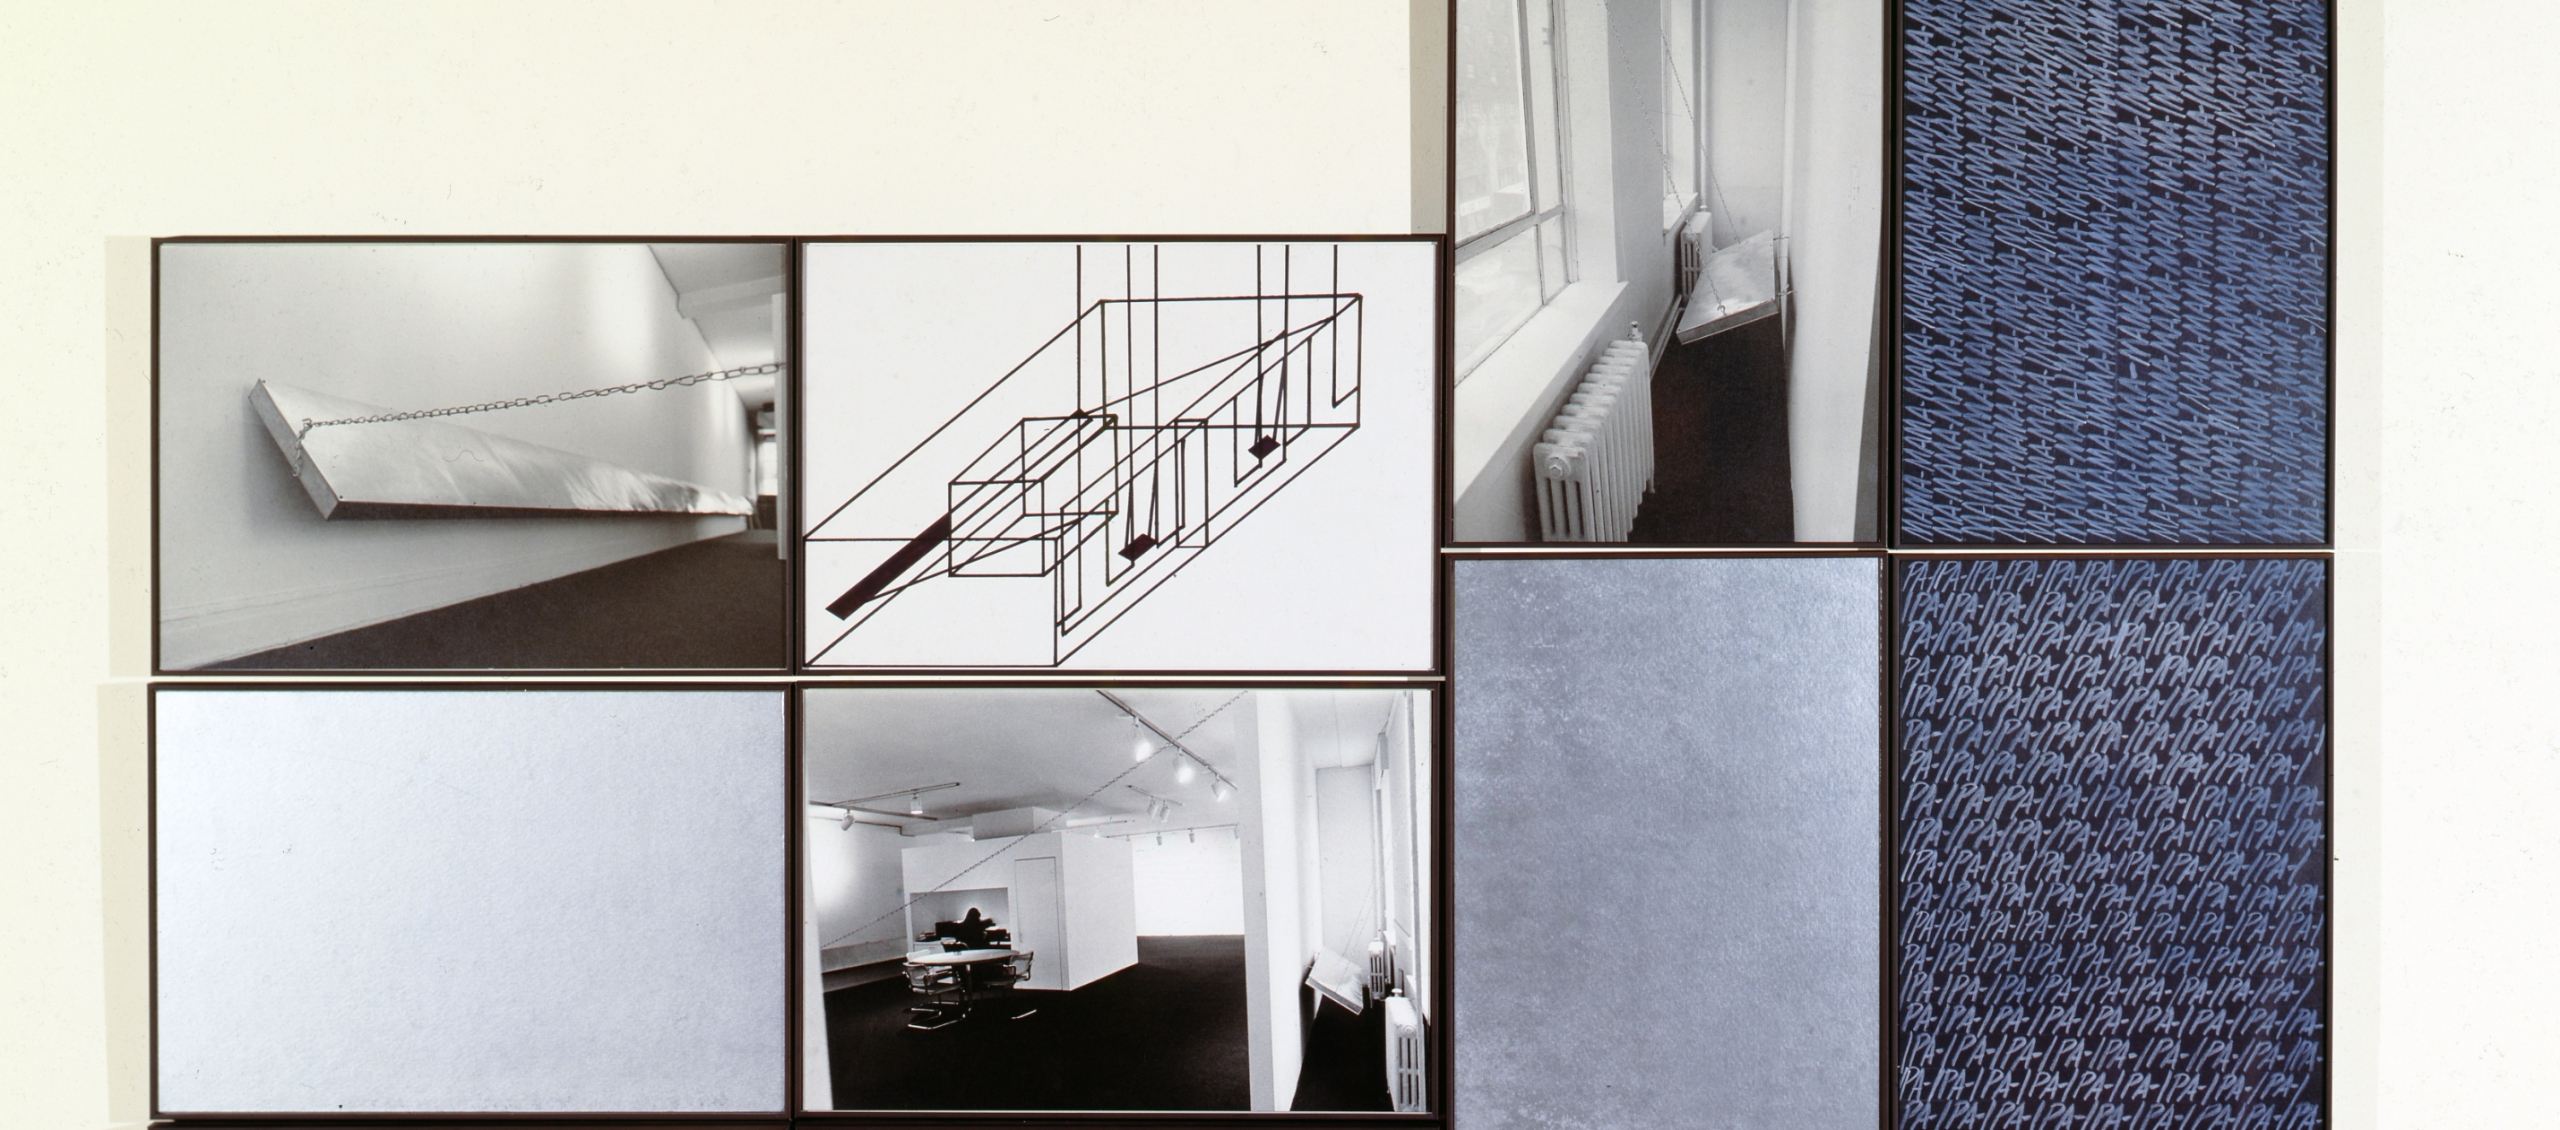 Vito Acconci, An Idea for Storage at a Small Gallery in Downtown Chicago, 1979